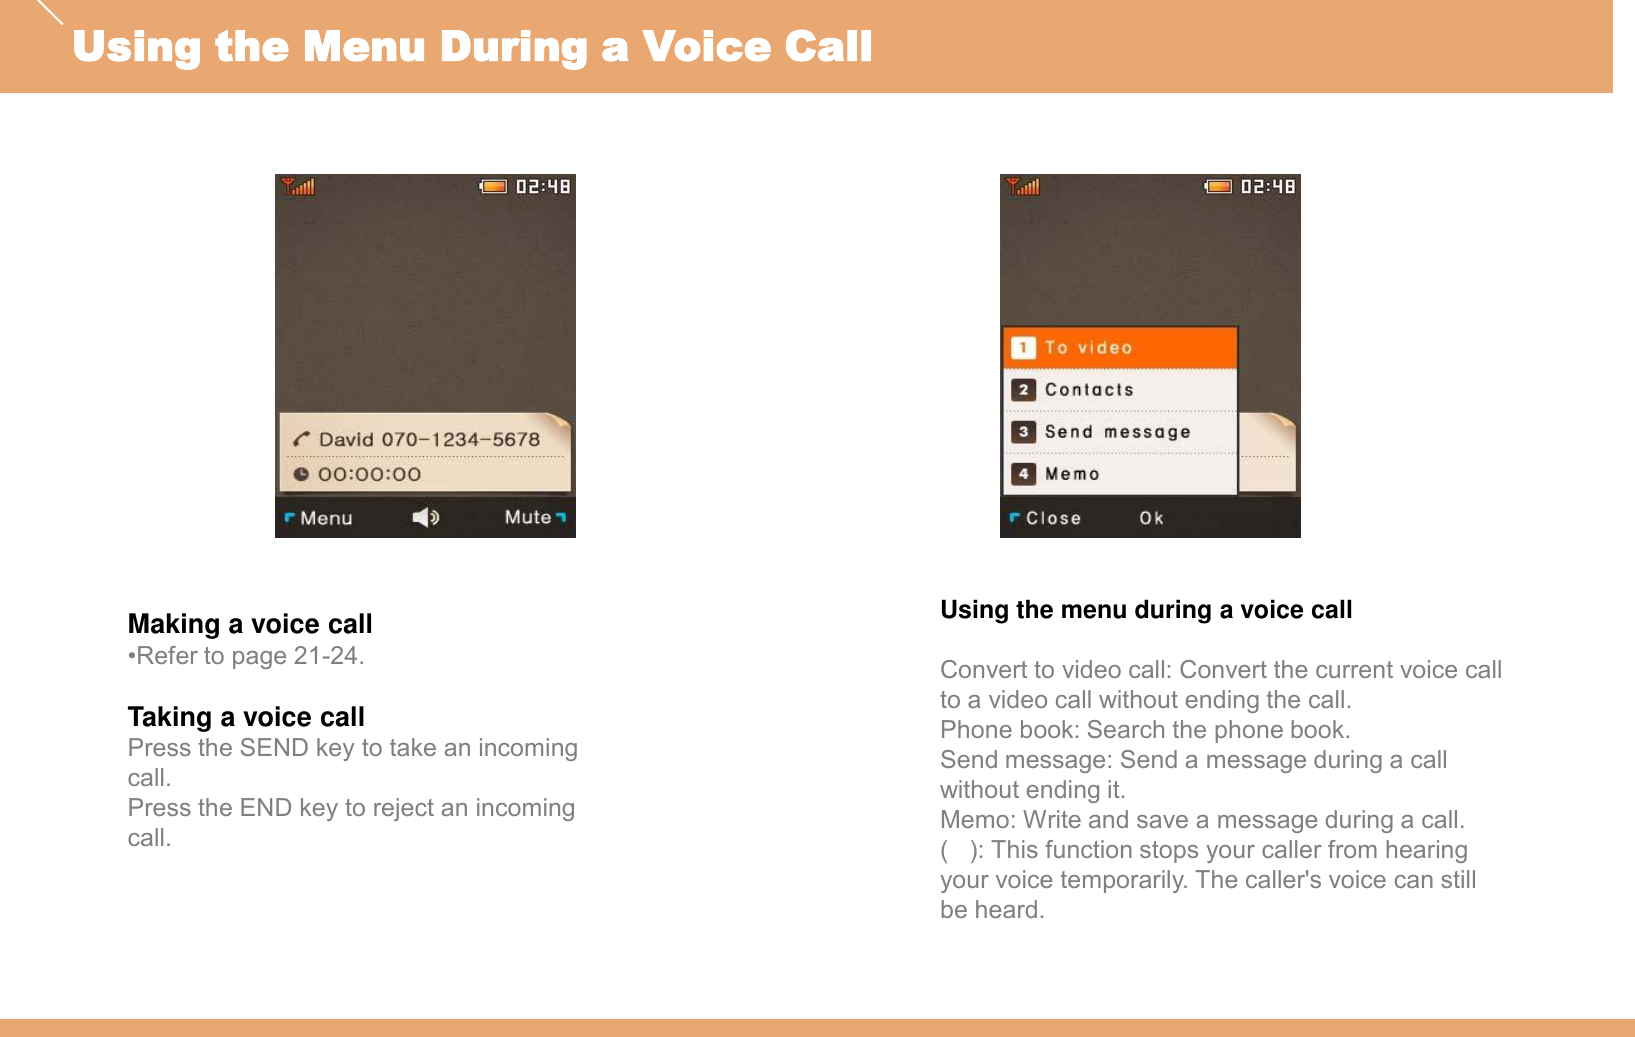 Making a voice call•Refer to page 21-24.Taking a voice callPress the SEND key to take an incoming call.Press the END key to reject an incoming call.Using the menu during a voice callConvert to video call: Convert the current voice call to a video call without ending the call.Phone book: Search the phone book.Send message: Send a message during a call without ending it.Memo: Write and save a message during a call.(   ): This function stops your caller from hearing your voice temporarily. The caller&apos;s voice can still be heard.Using the Menu During a Voice Call